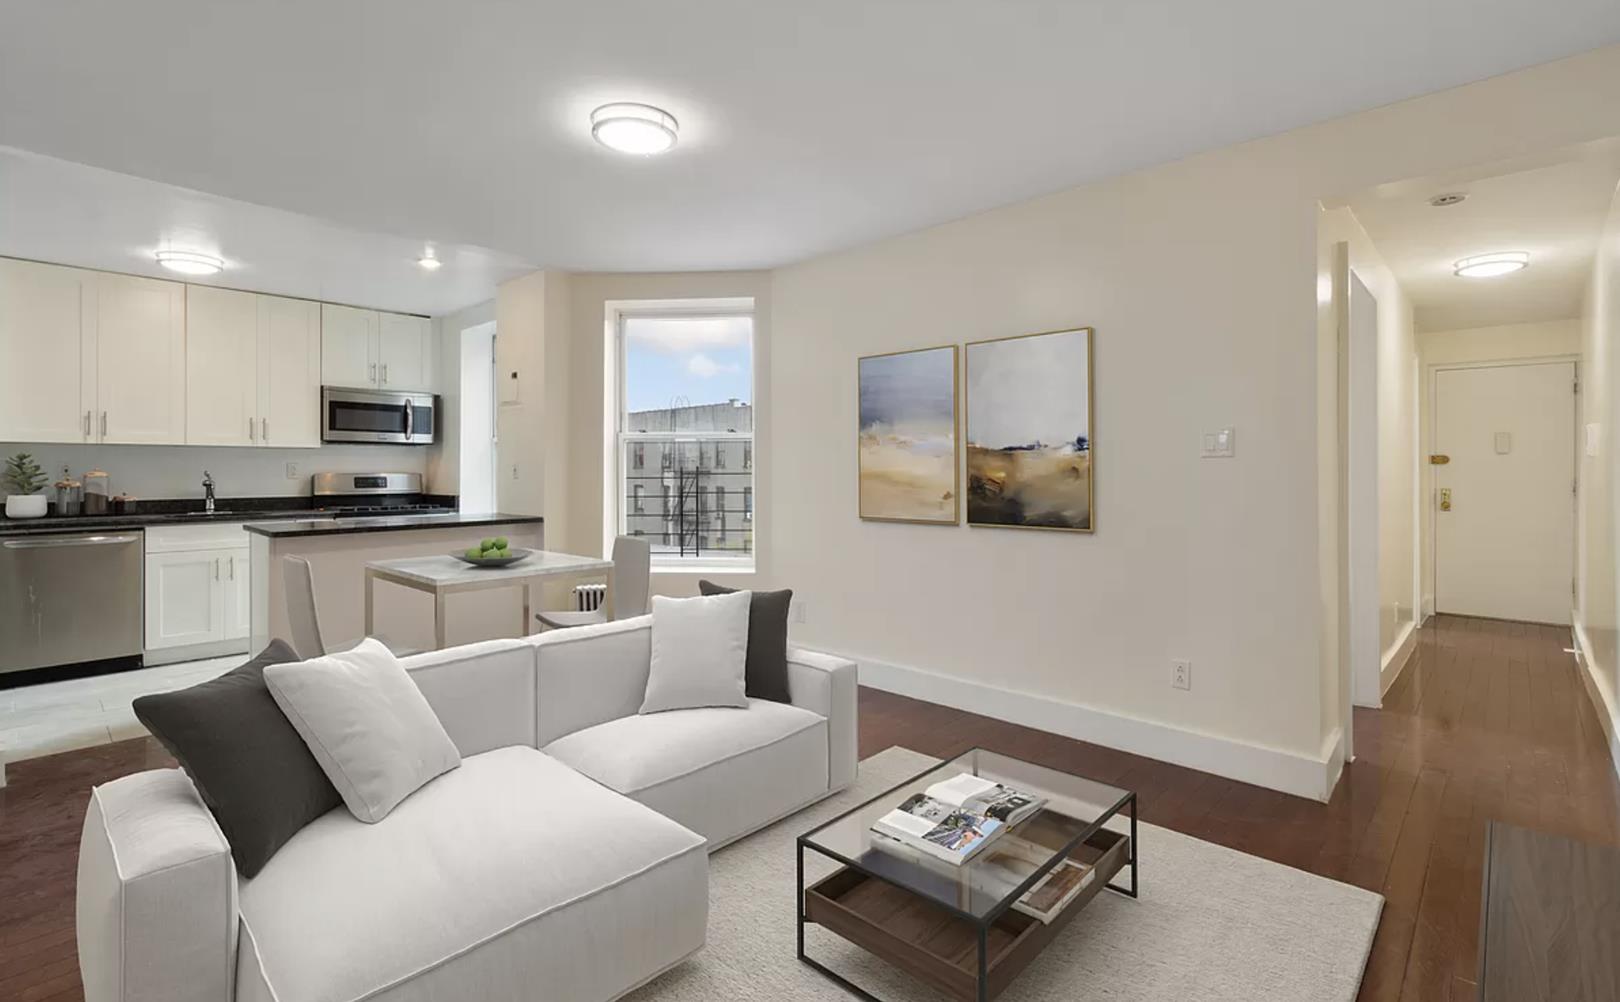 1050 Lafayette Avenue 8, Stuyvesant Heights, Downtown, NYC - 3 Bedrooms  
1 Bathrooms  
5 Rooms - 